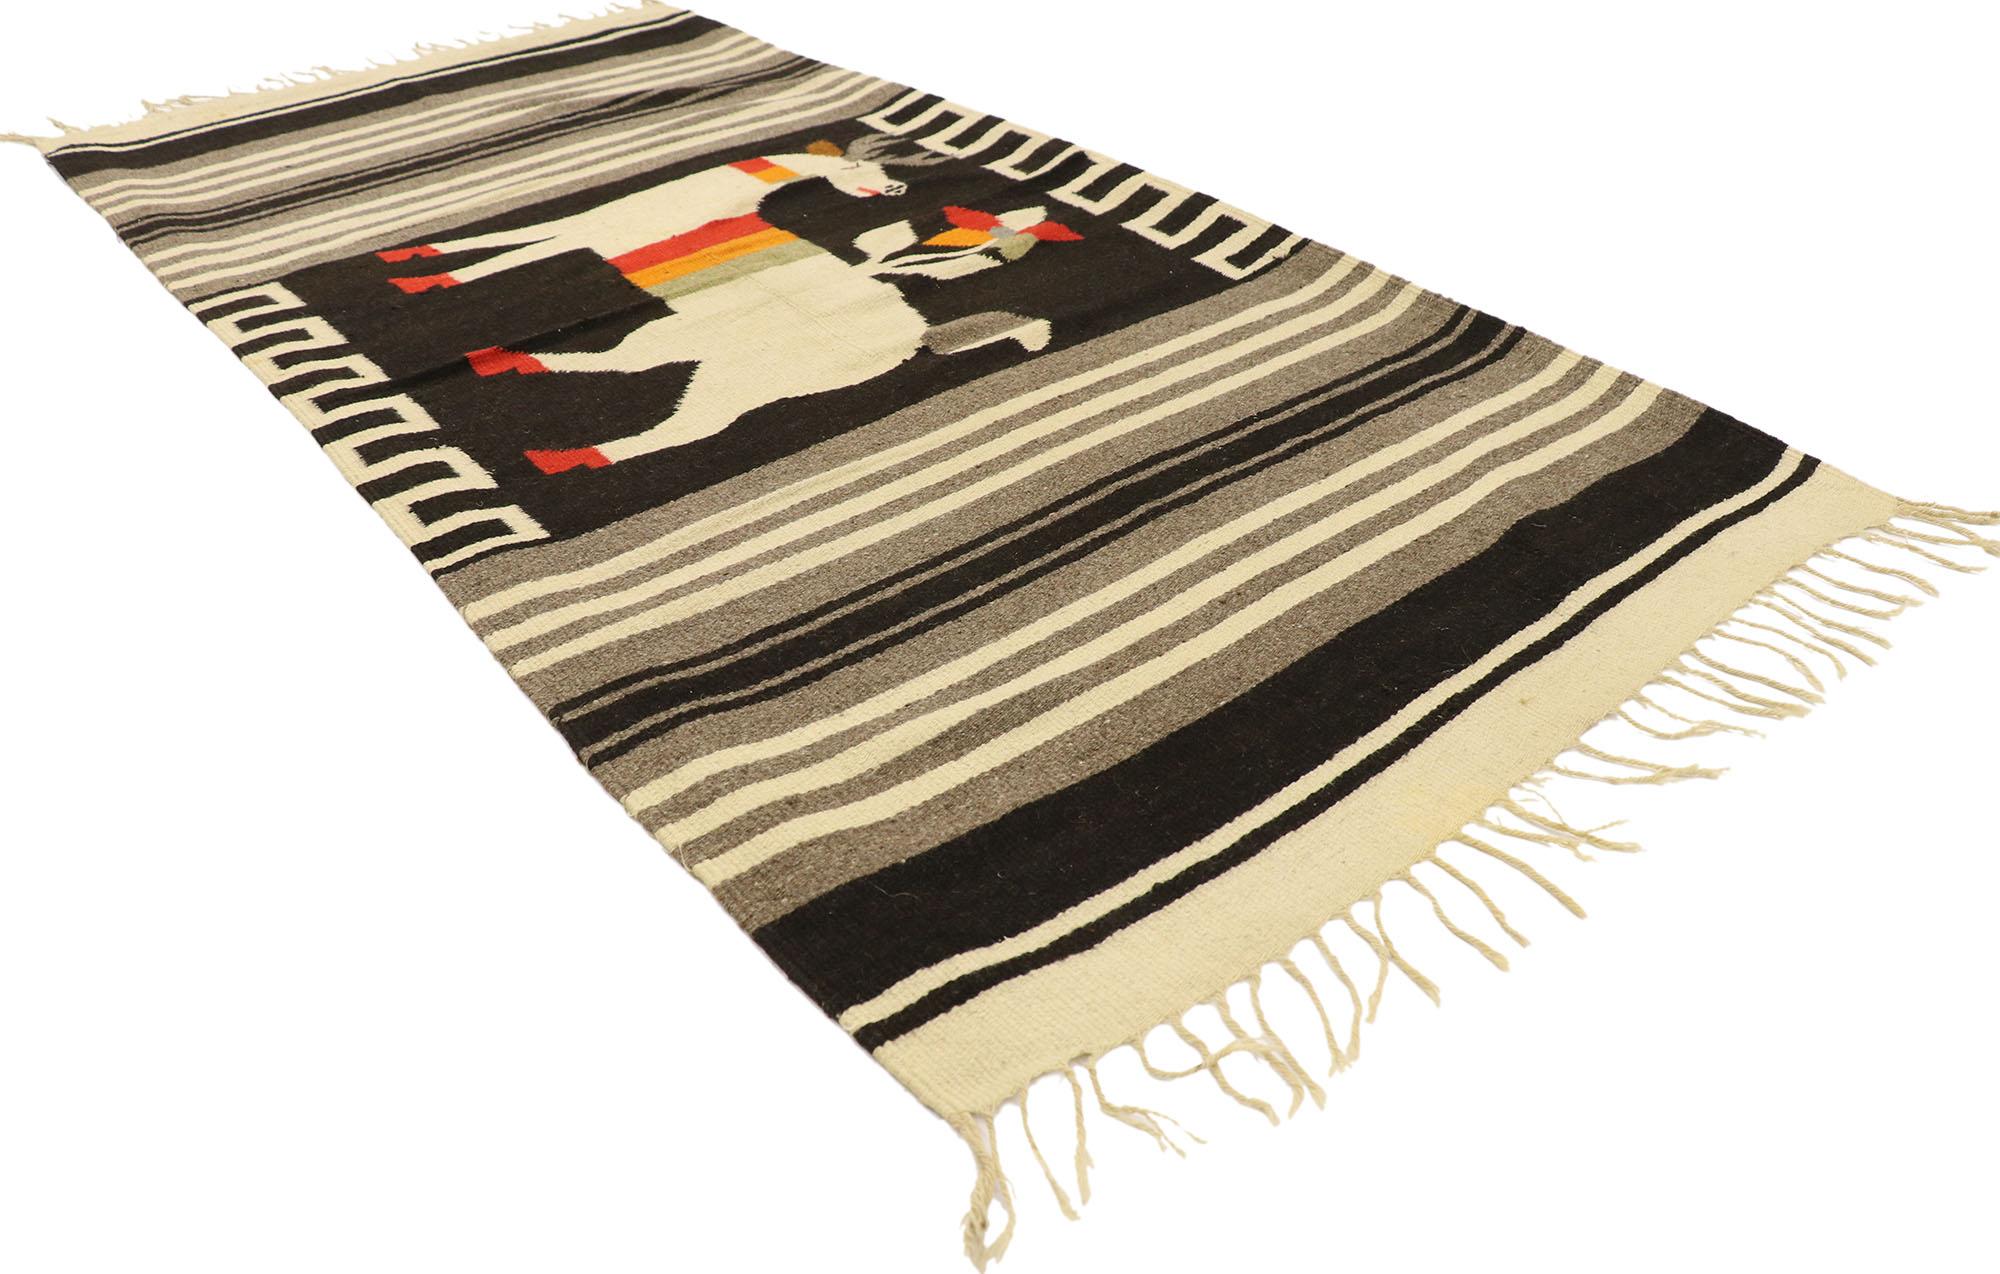 77962 Vintage Mexican Kilim Serape Blanket rug with Deer Pictorial 02'07 x 05'05. With its bold expressive design, incredible detail and texture, this hand-woven wool vintage Mexican Kilim Serape blanket rug is a captivating vision of woven beauty.